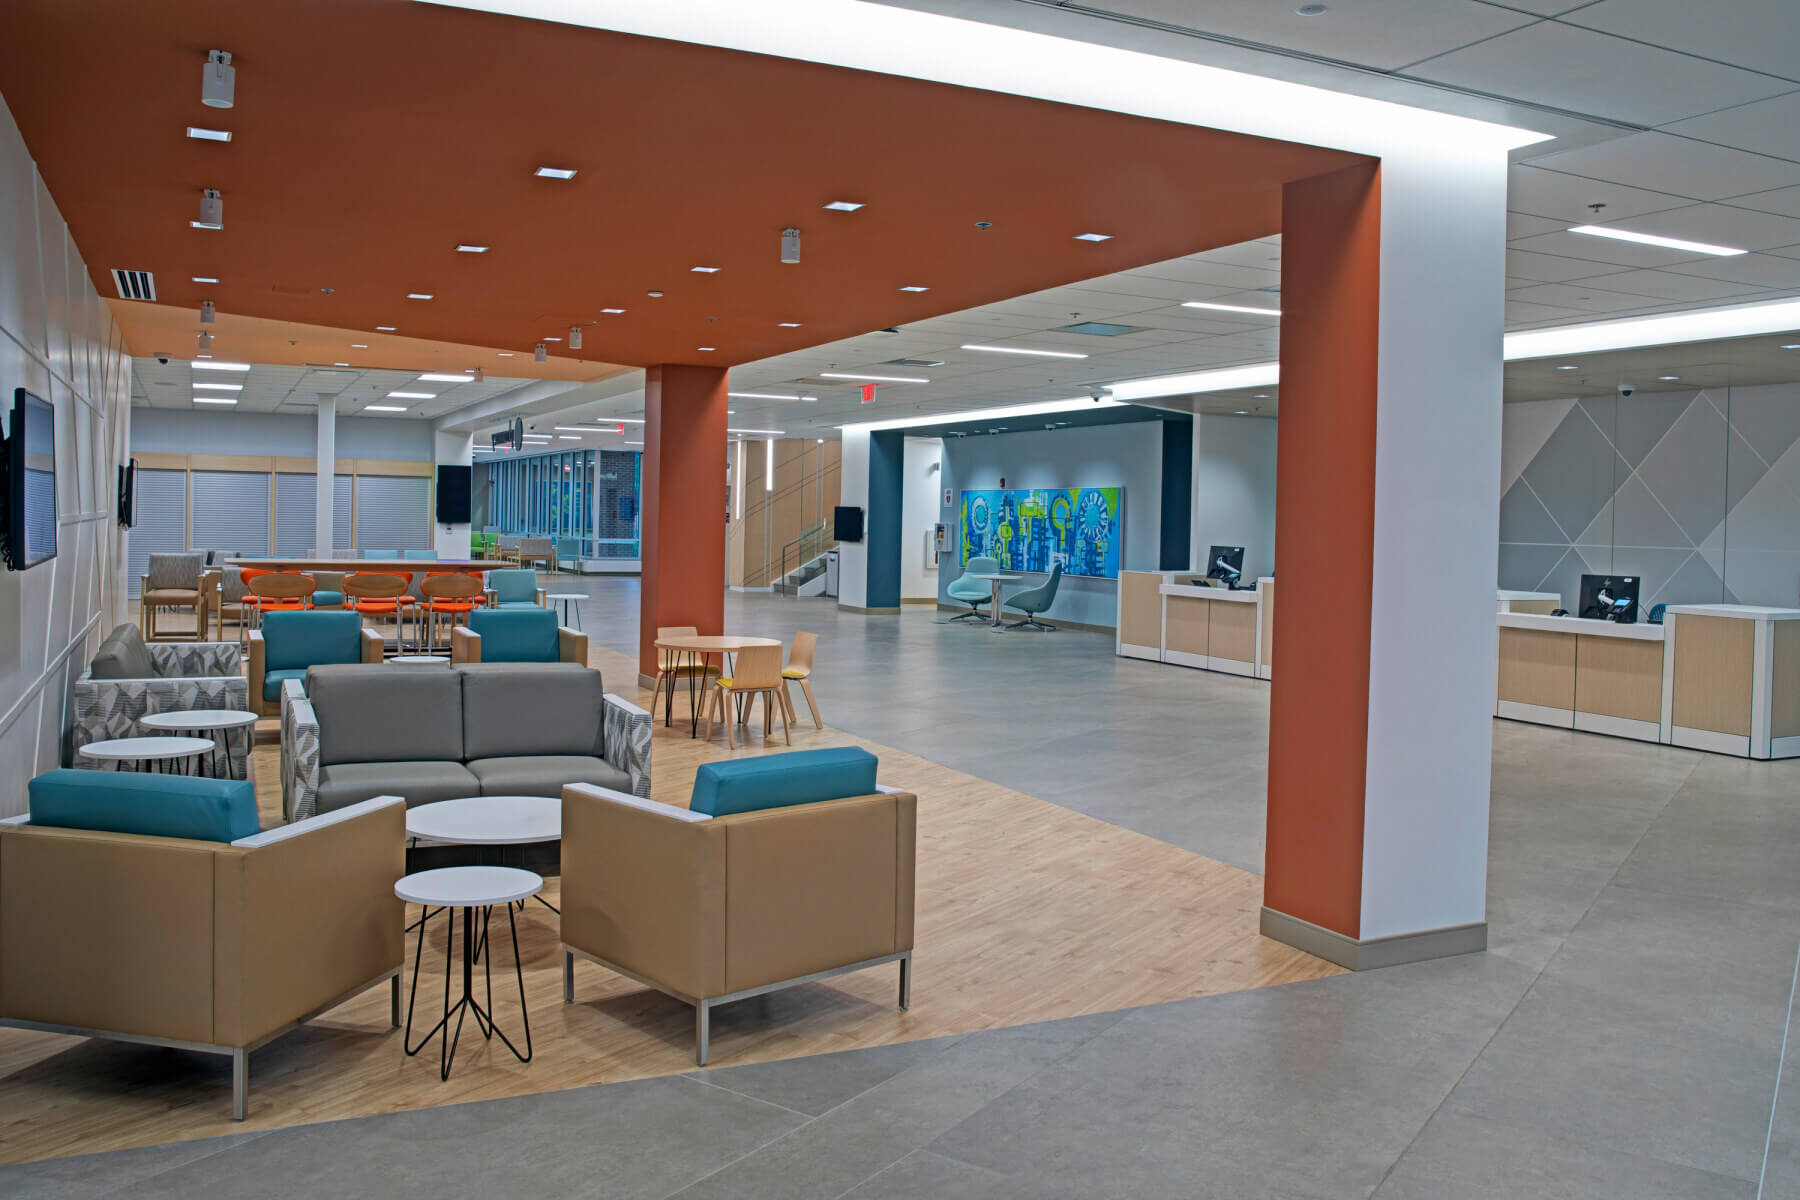 an unoccupied waiting area near the main reception desk, with an orange ceiling and colorful seating